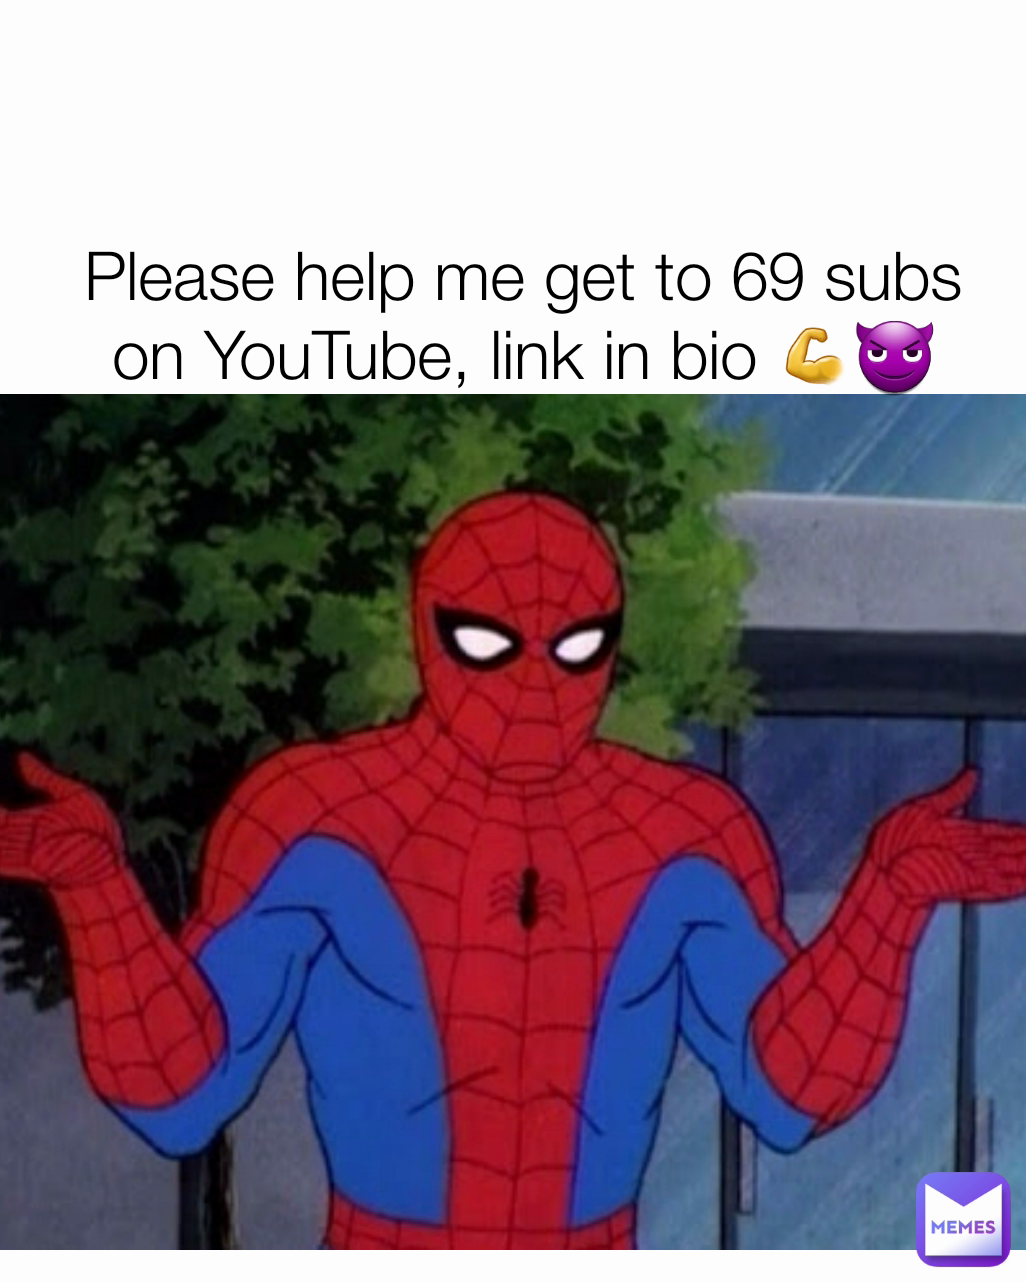 Please help me get to 69 subs on YouTube, link in bio 💪😈